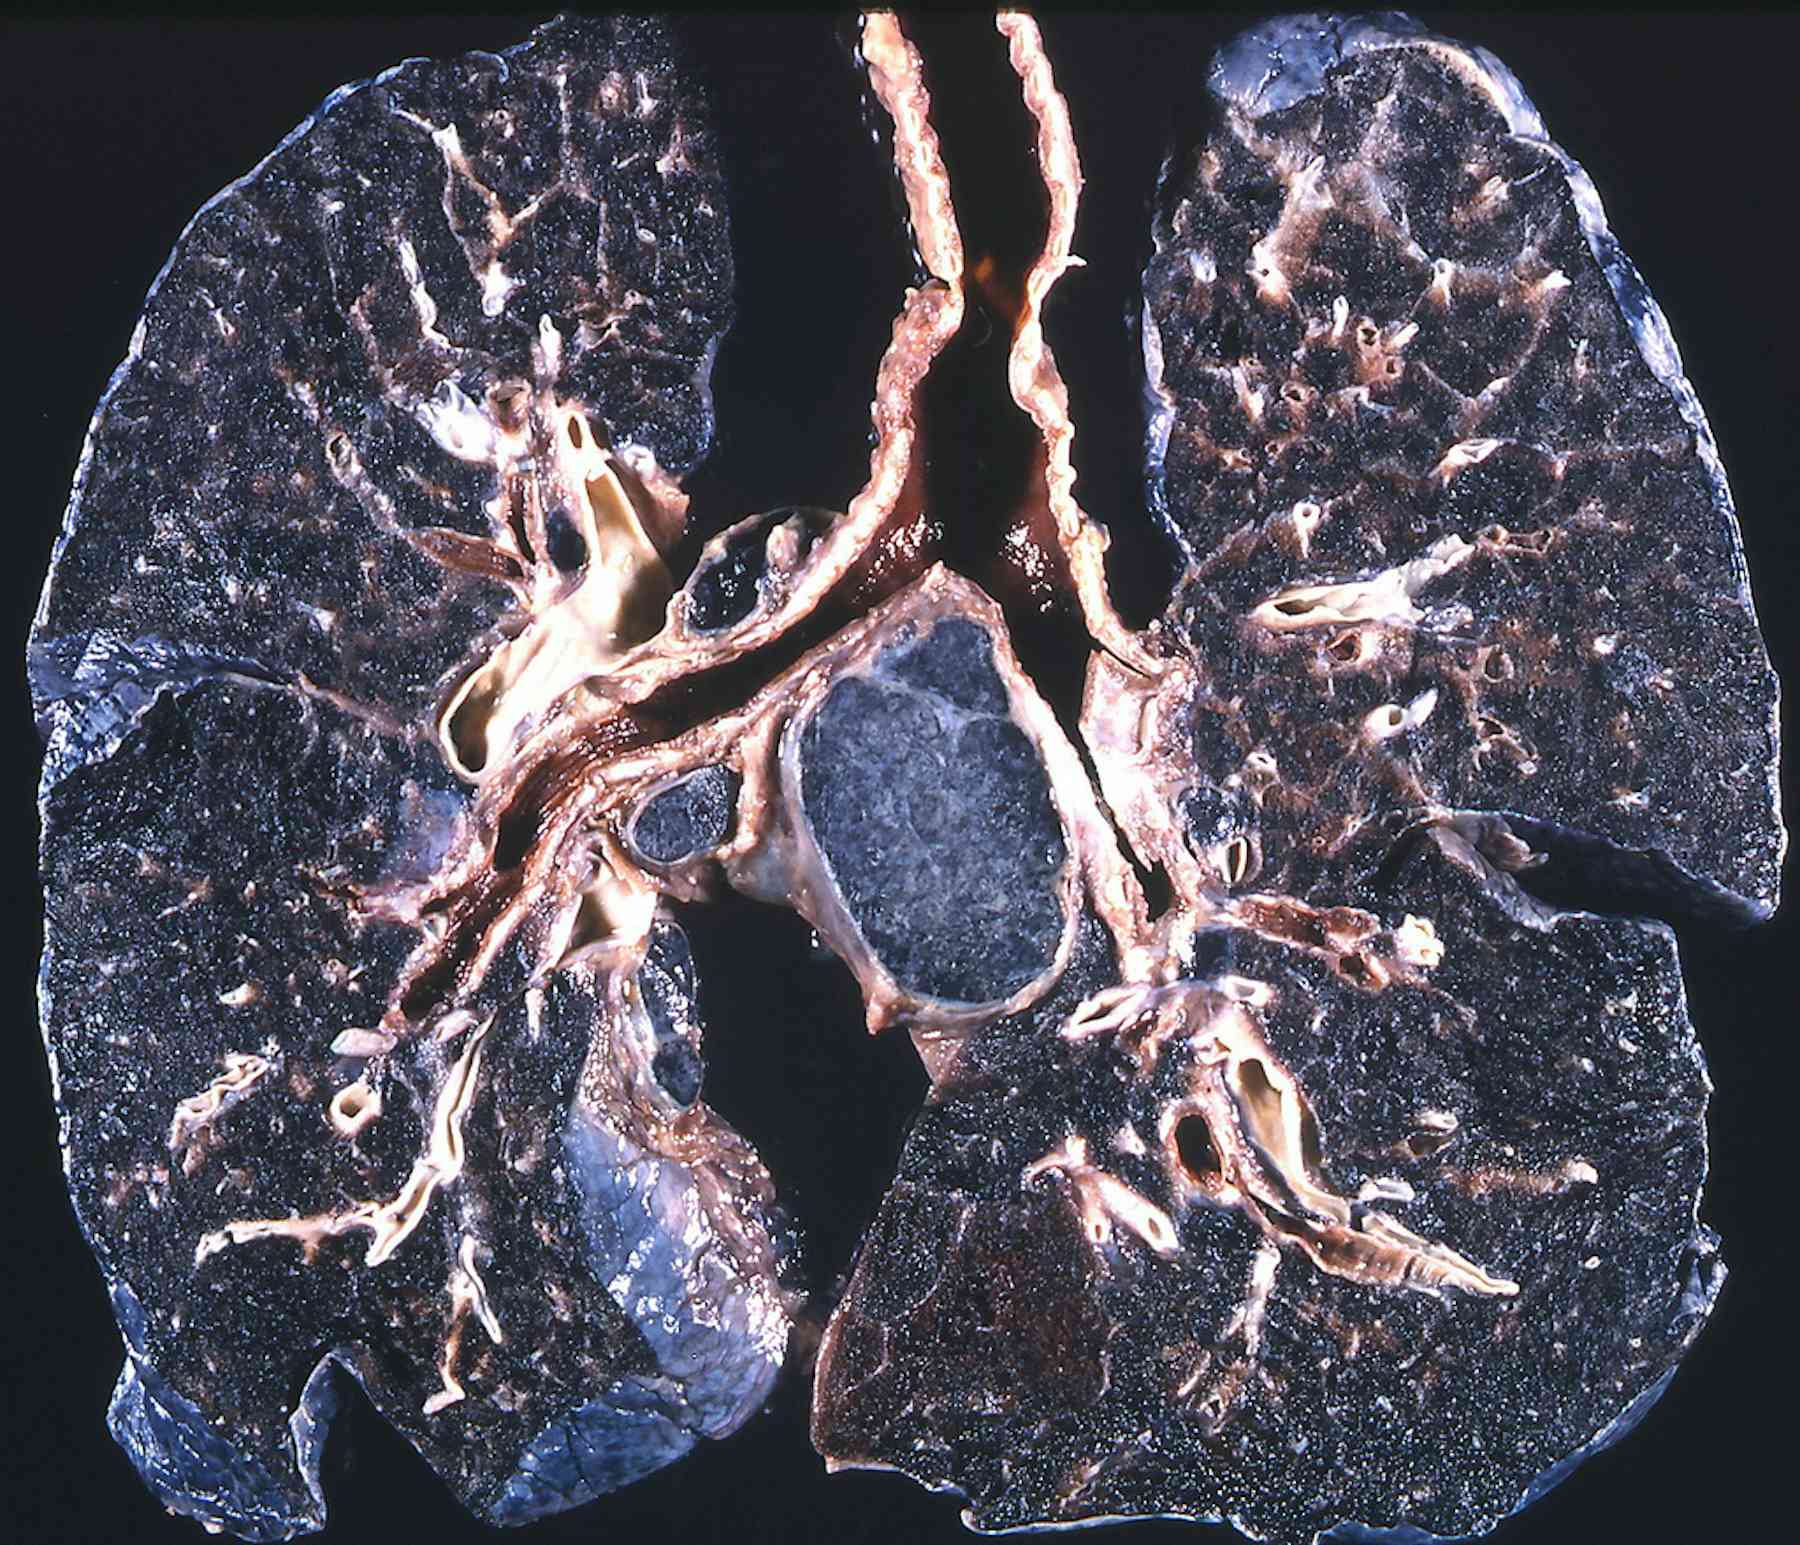 black lung disease research paper